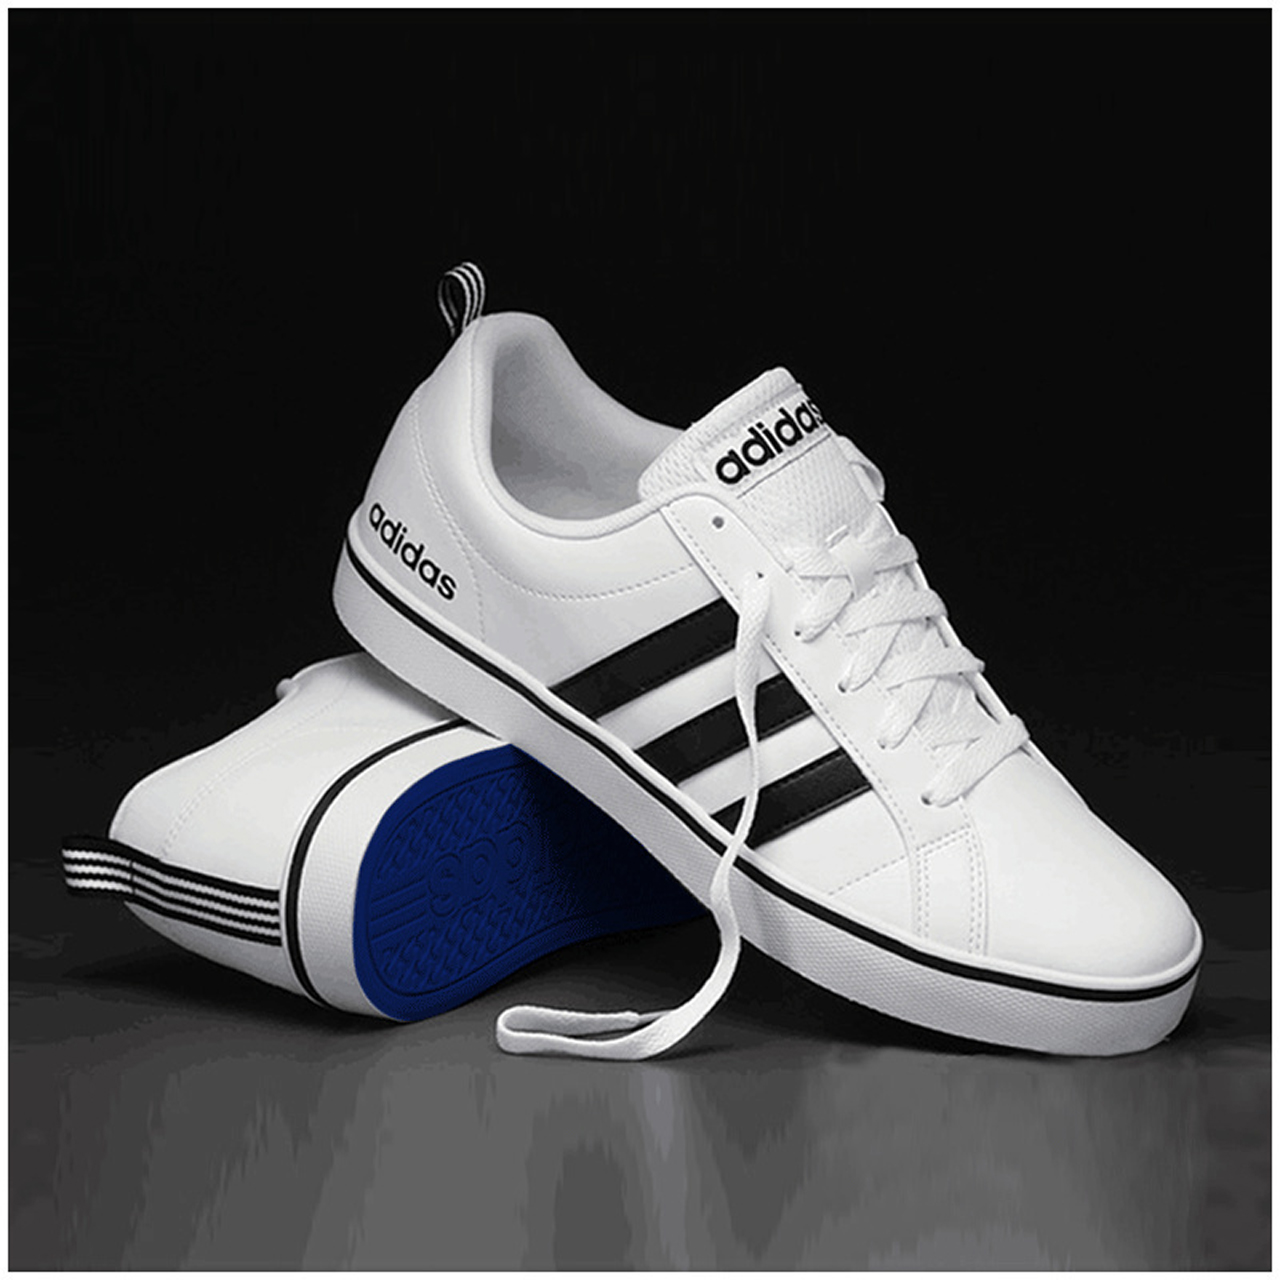 Adidas Men's Shoe Board Shoes 2019 Autumn Little White Shoes Sports Shoes Lightweight and Breathable Shoes Casual Shoes AW4594